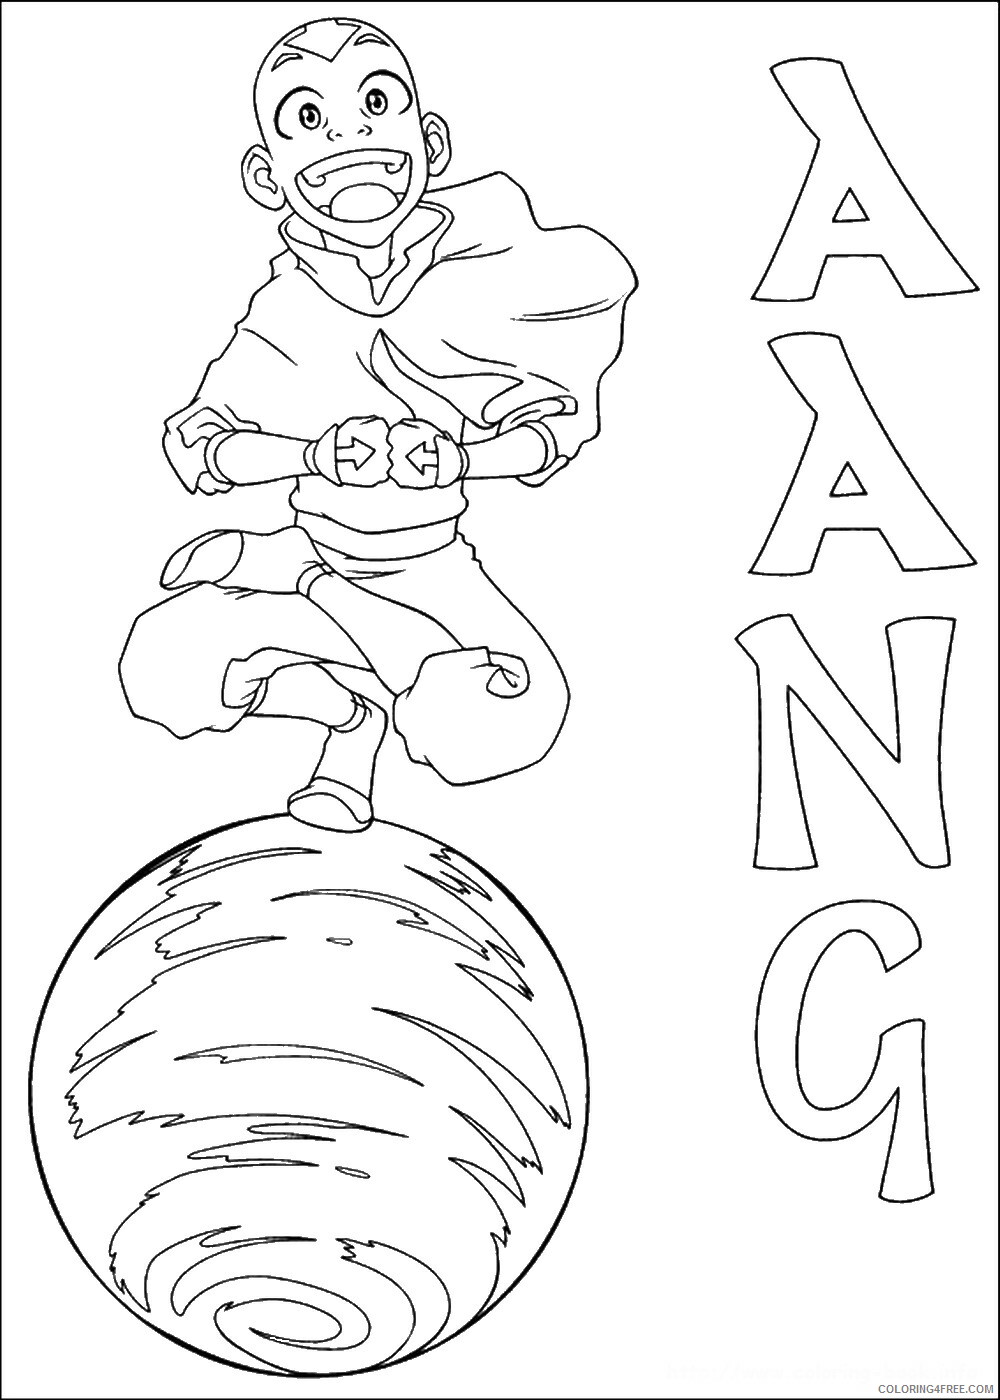 Avatar the Last Airbender Coloring Pages TV Film avatar_cl106 Printable 2020 00264 Coloring4free